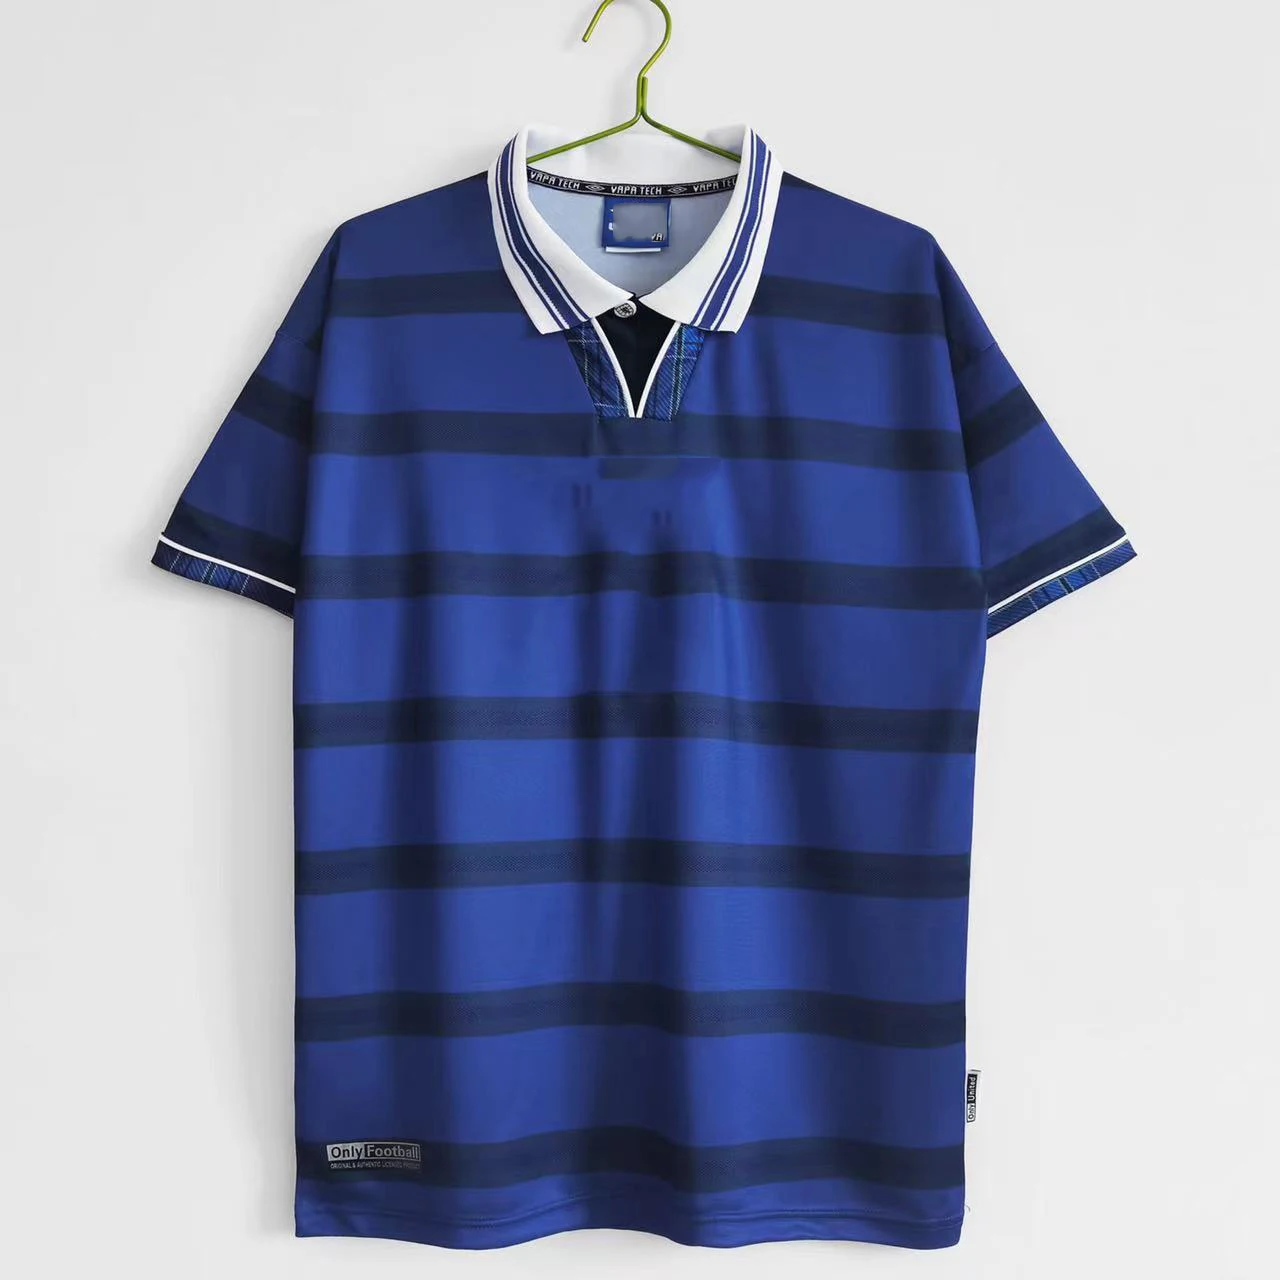 Contrast Detail Gucci Vintage Football Jersey